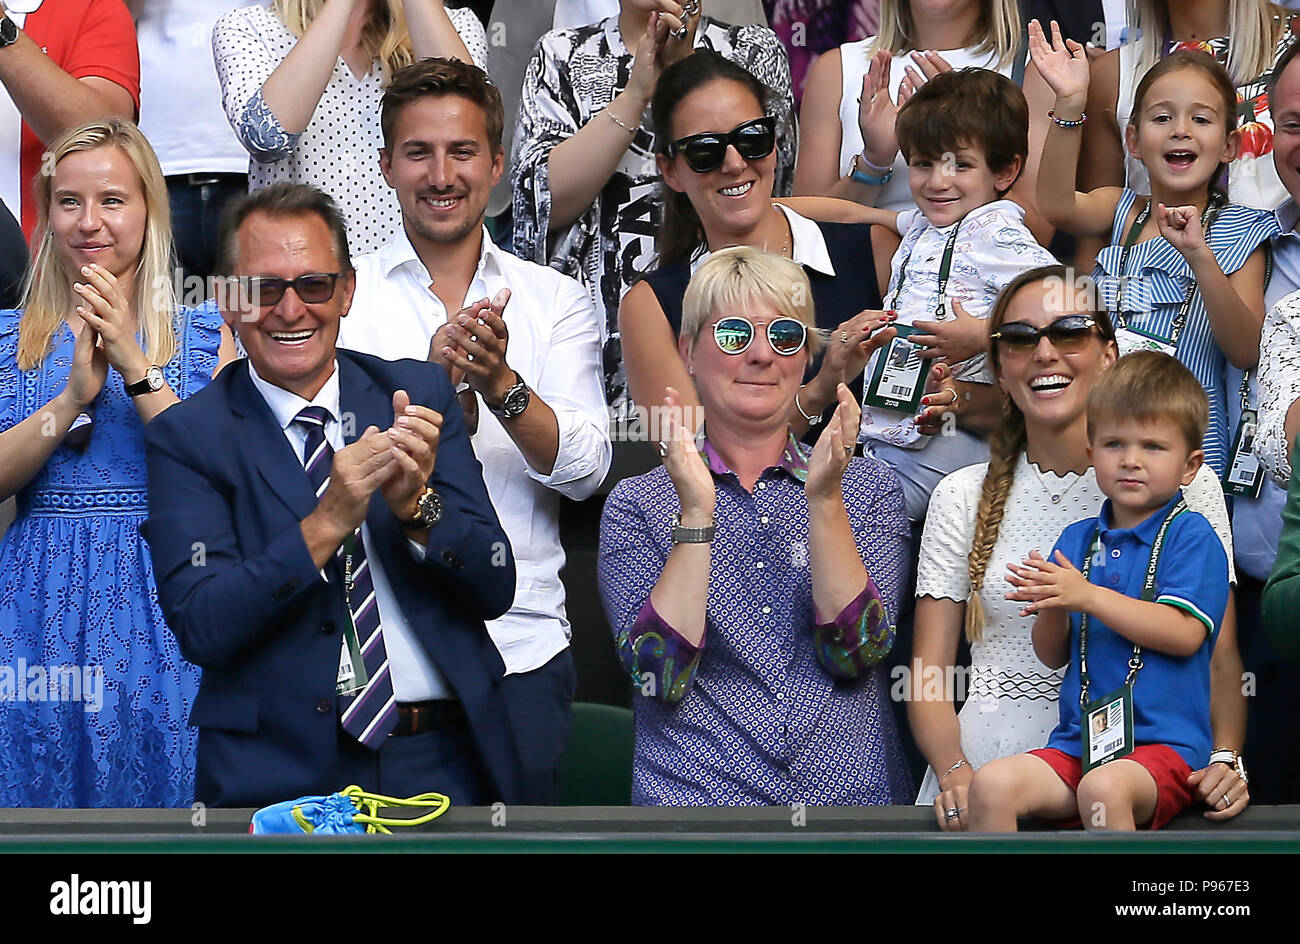 Novak Djokovic S Wife Jelena And Son Stefan In The Players Box After He Wins The Gentlemen S Singles Final Against Kevin Anderson On Day Thirteen Of The Wimbledon Championships At The All England